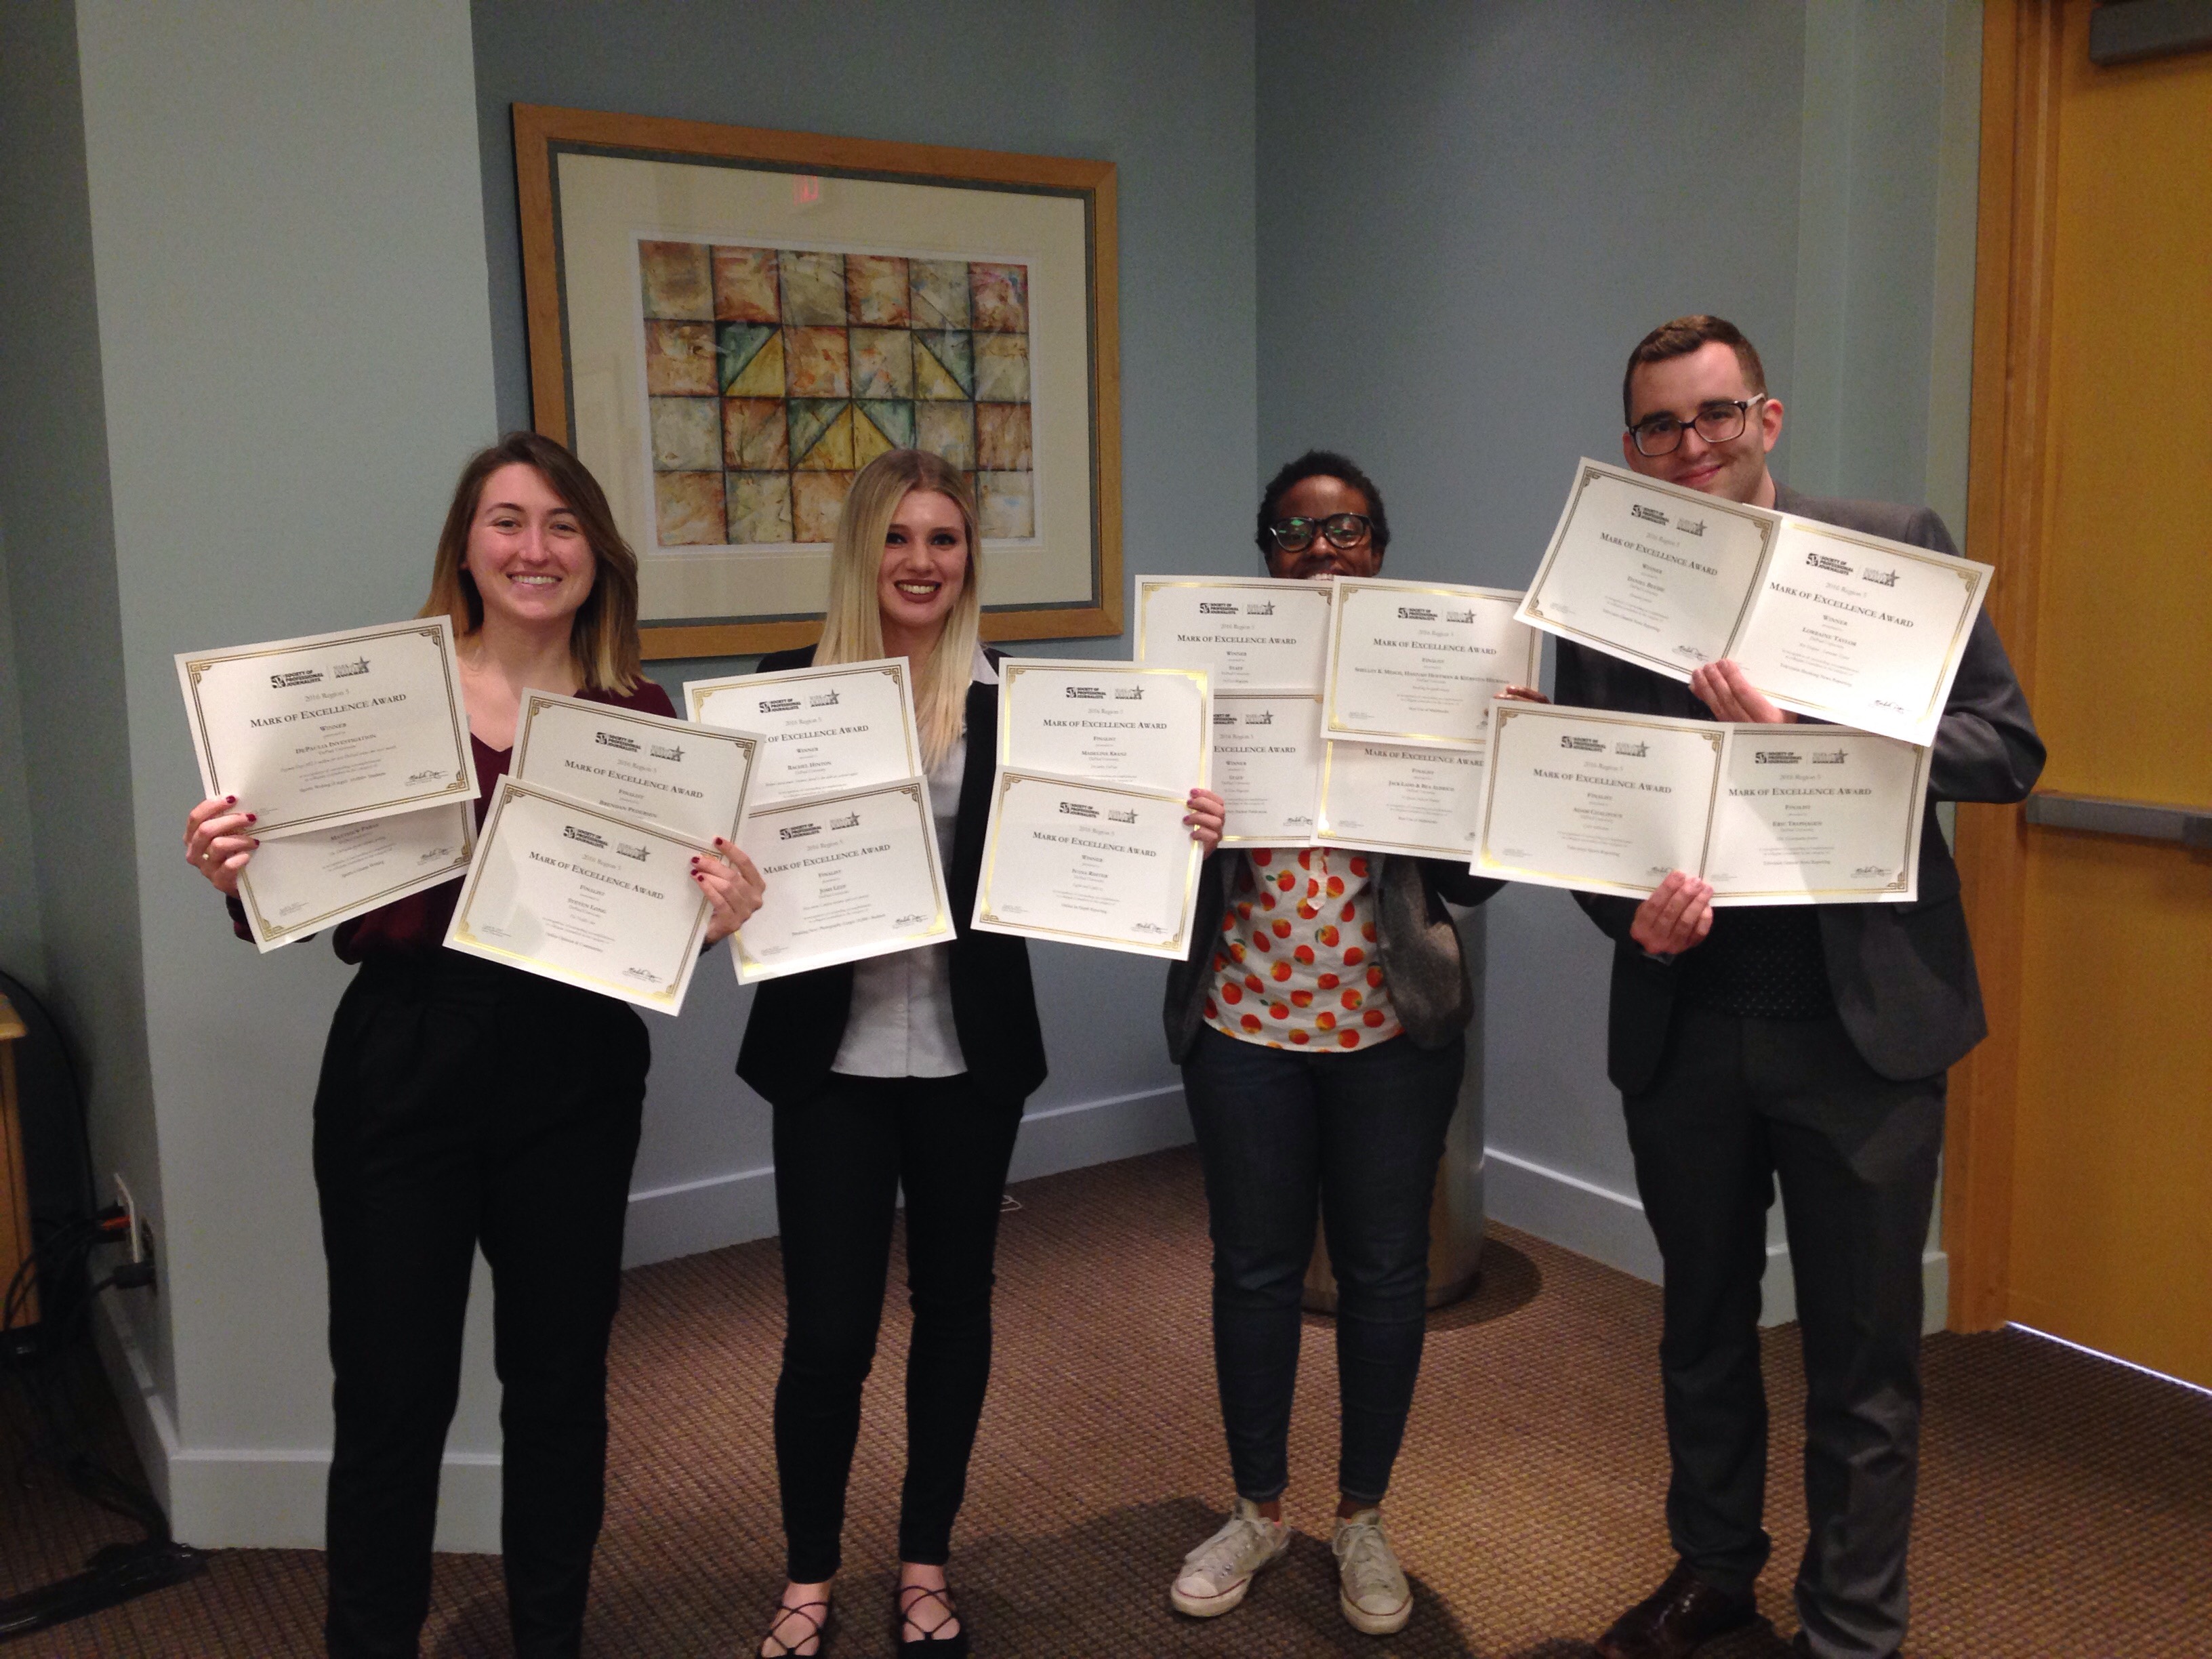 DePaul SPJ/ONA Chapter officers pose with certificates for the 16 awards won by DePaul student journalists at last weekend’s SPJ Region 5 conference in Indianapolis. From left, Danielle Church, Ally Pruitt, Rachel Hinton and Kyle Woosley.